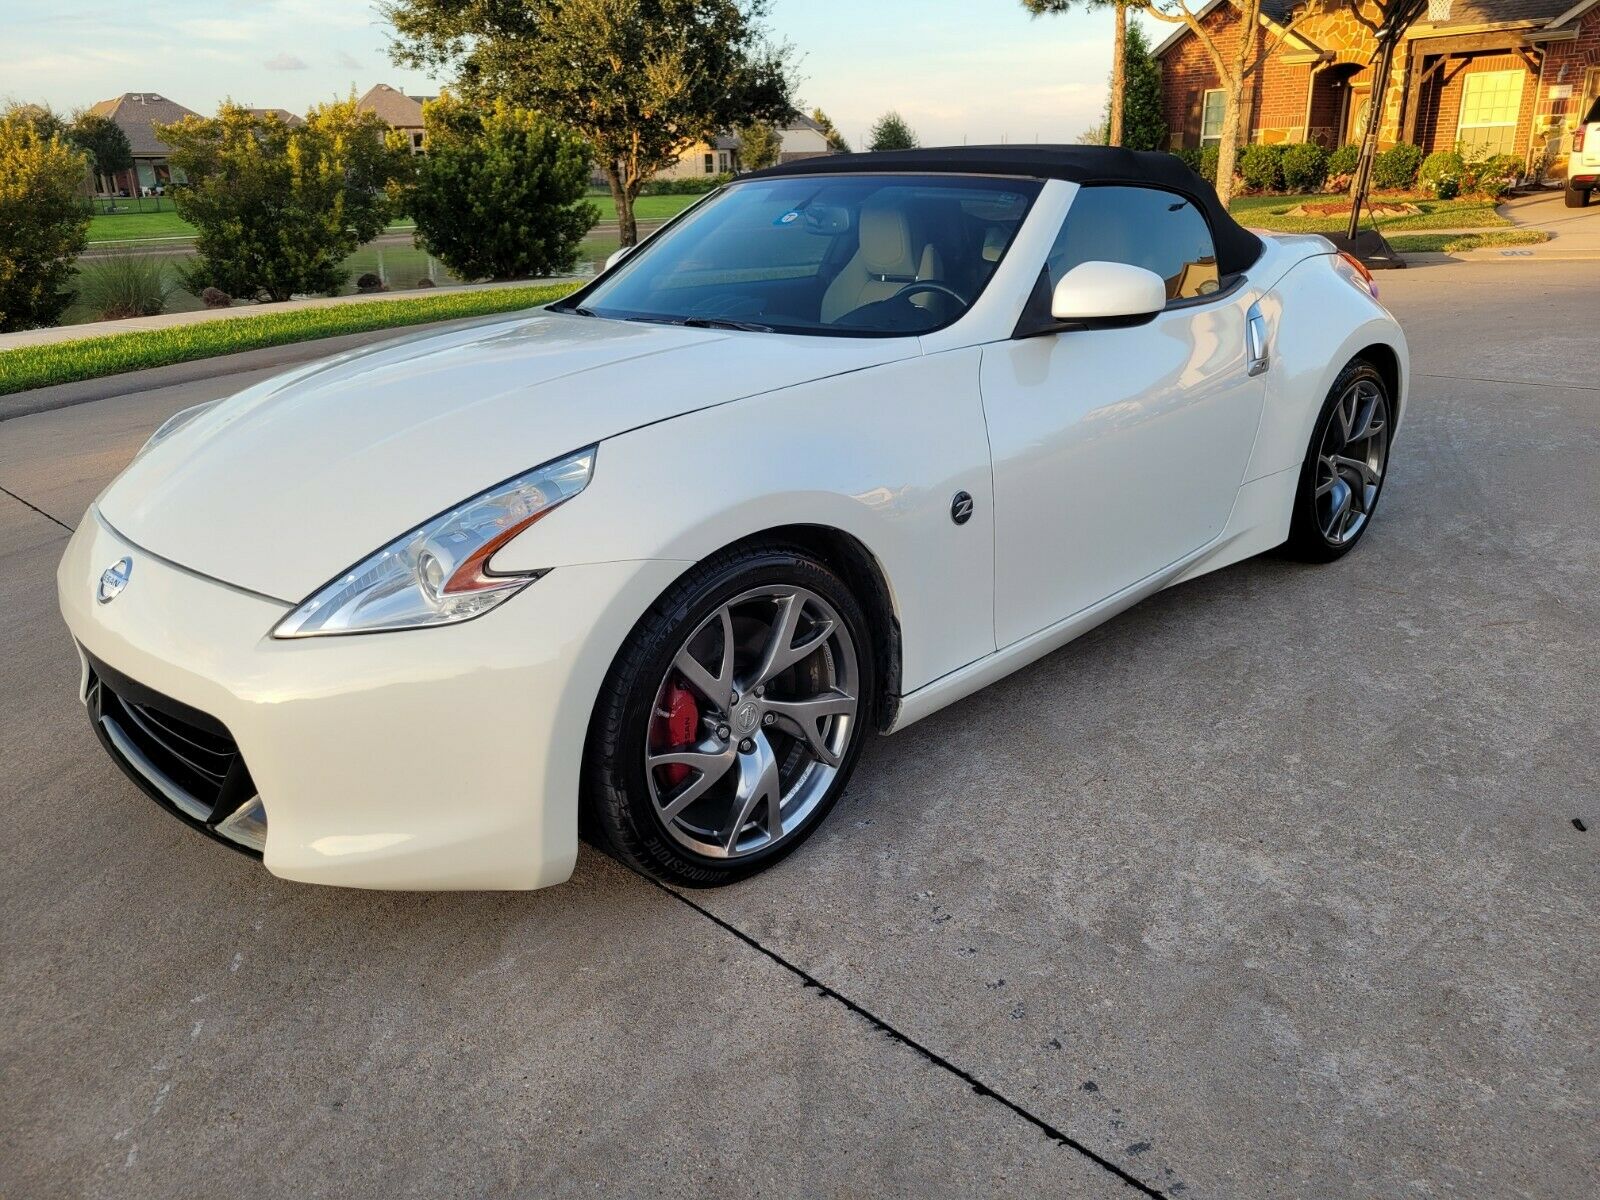 2013 Nissan 370z Touring Convertible 3.7l  2d 2013 Nissan 370z Convertible, Touring,gps,camera,cooled Seats Leather No Reserve